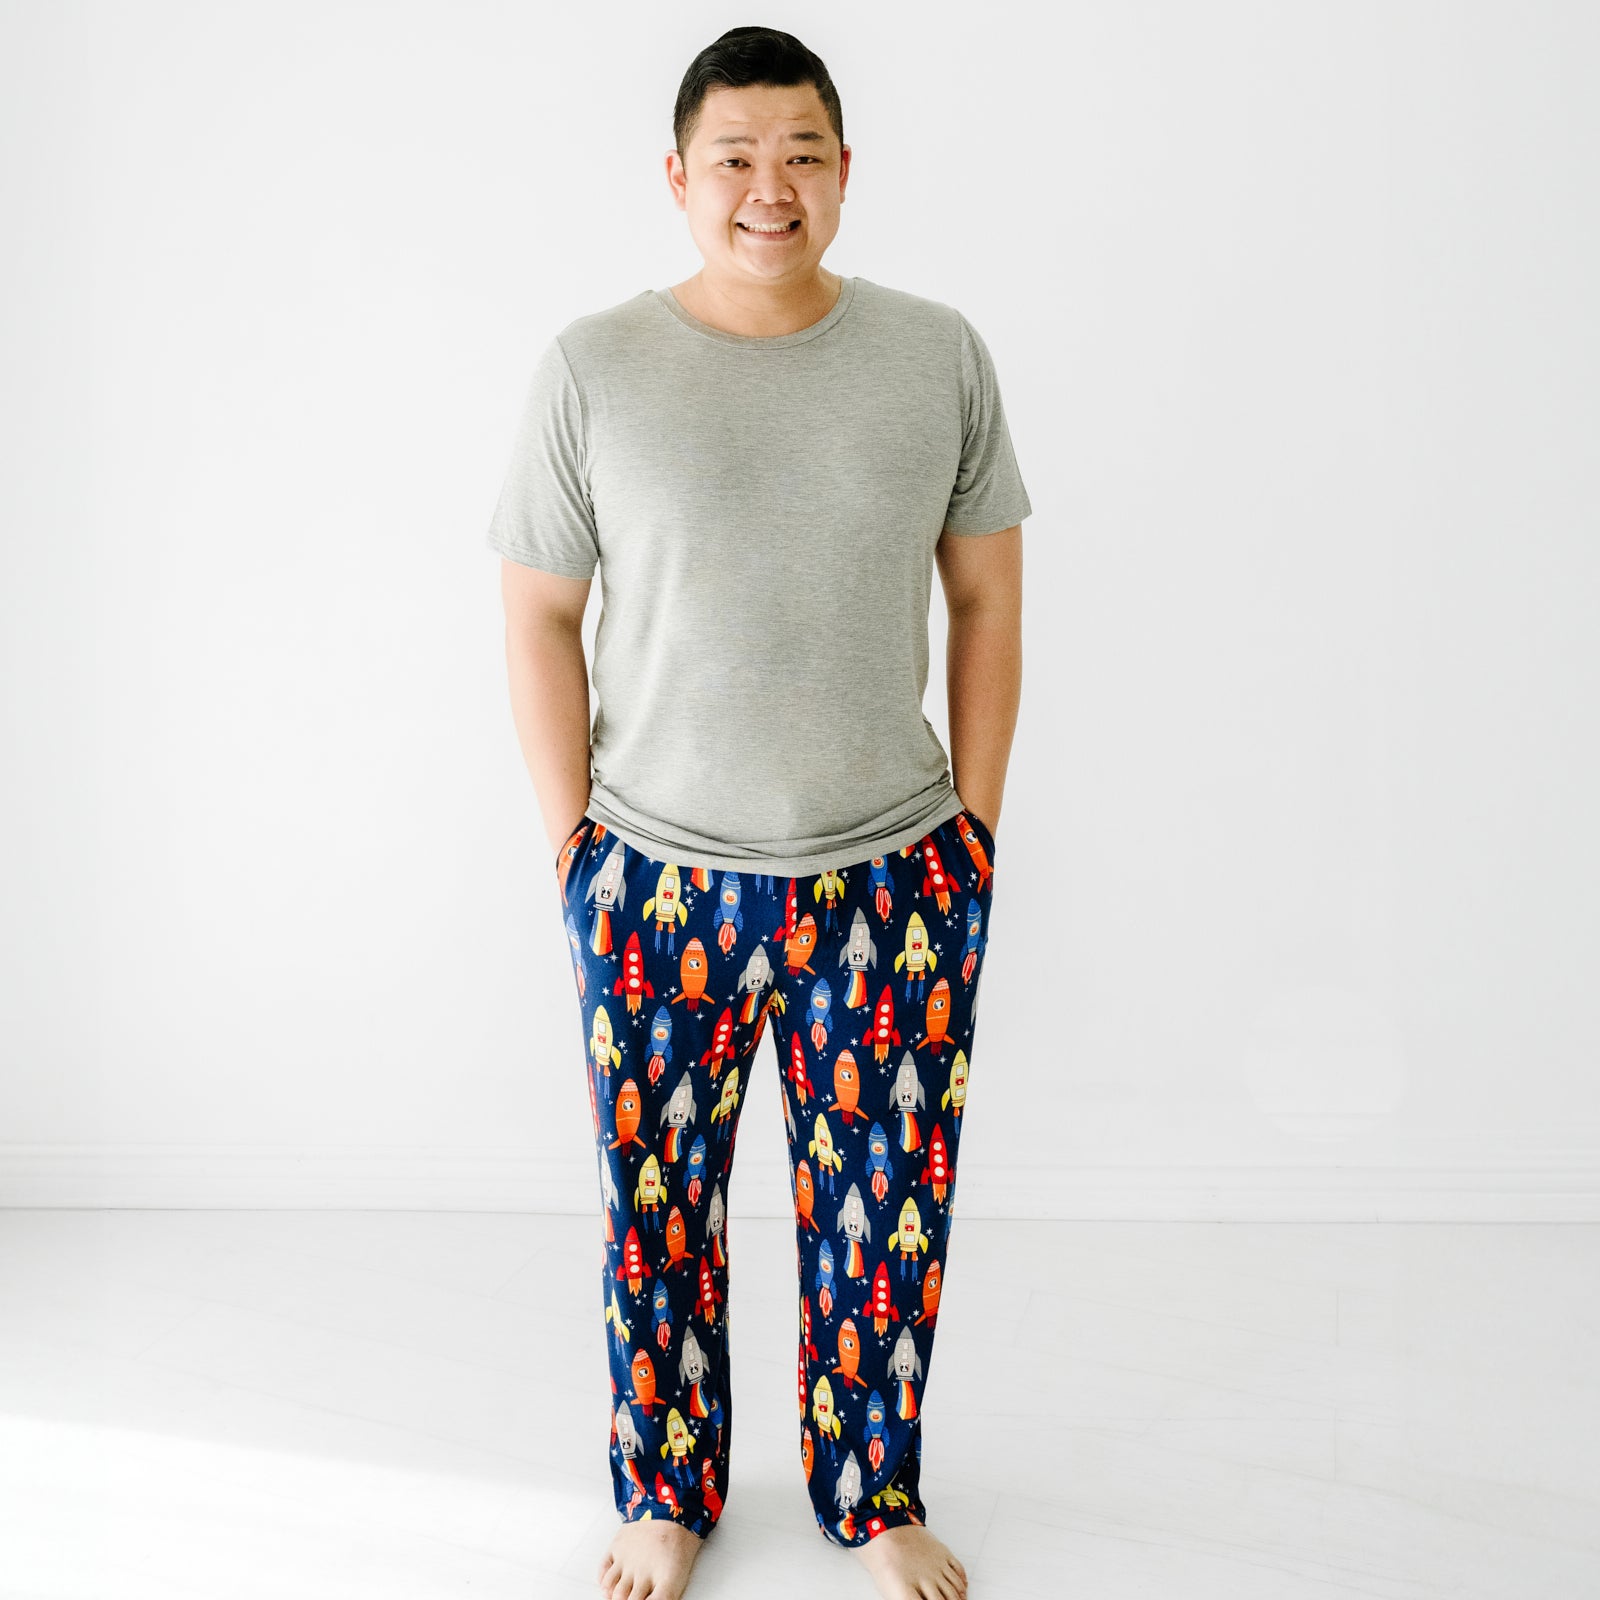 Man wearing men's Navy Space Explorer pajama pants paired with a solid heather gray men's pajama top